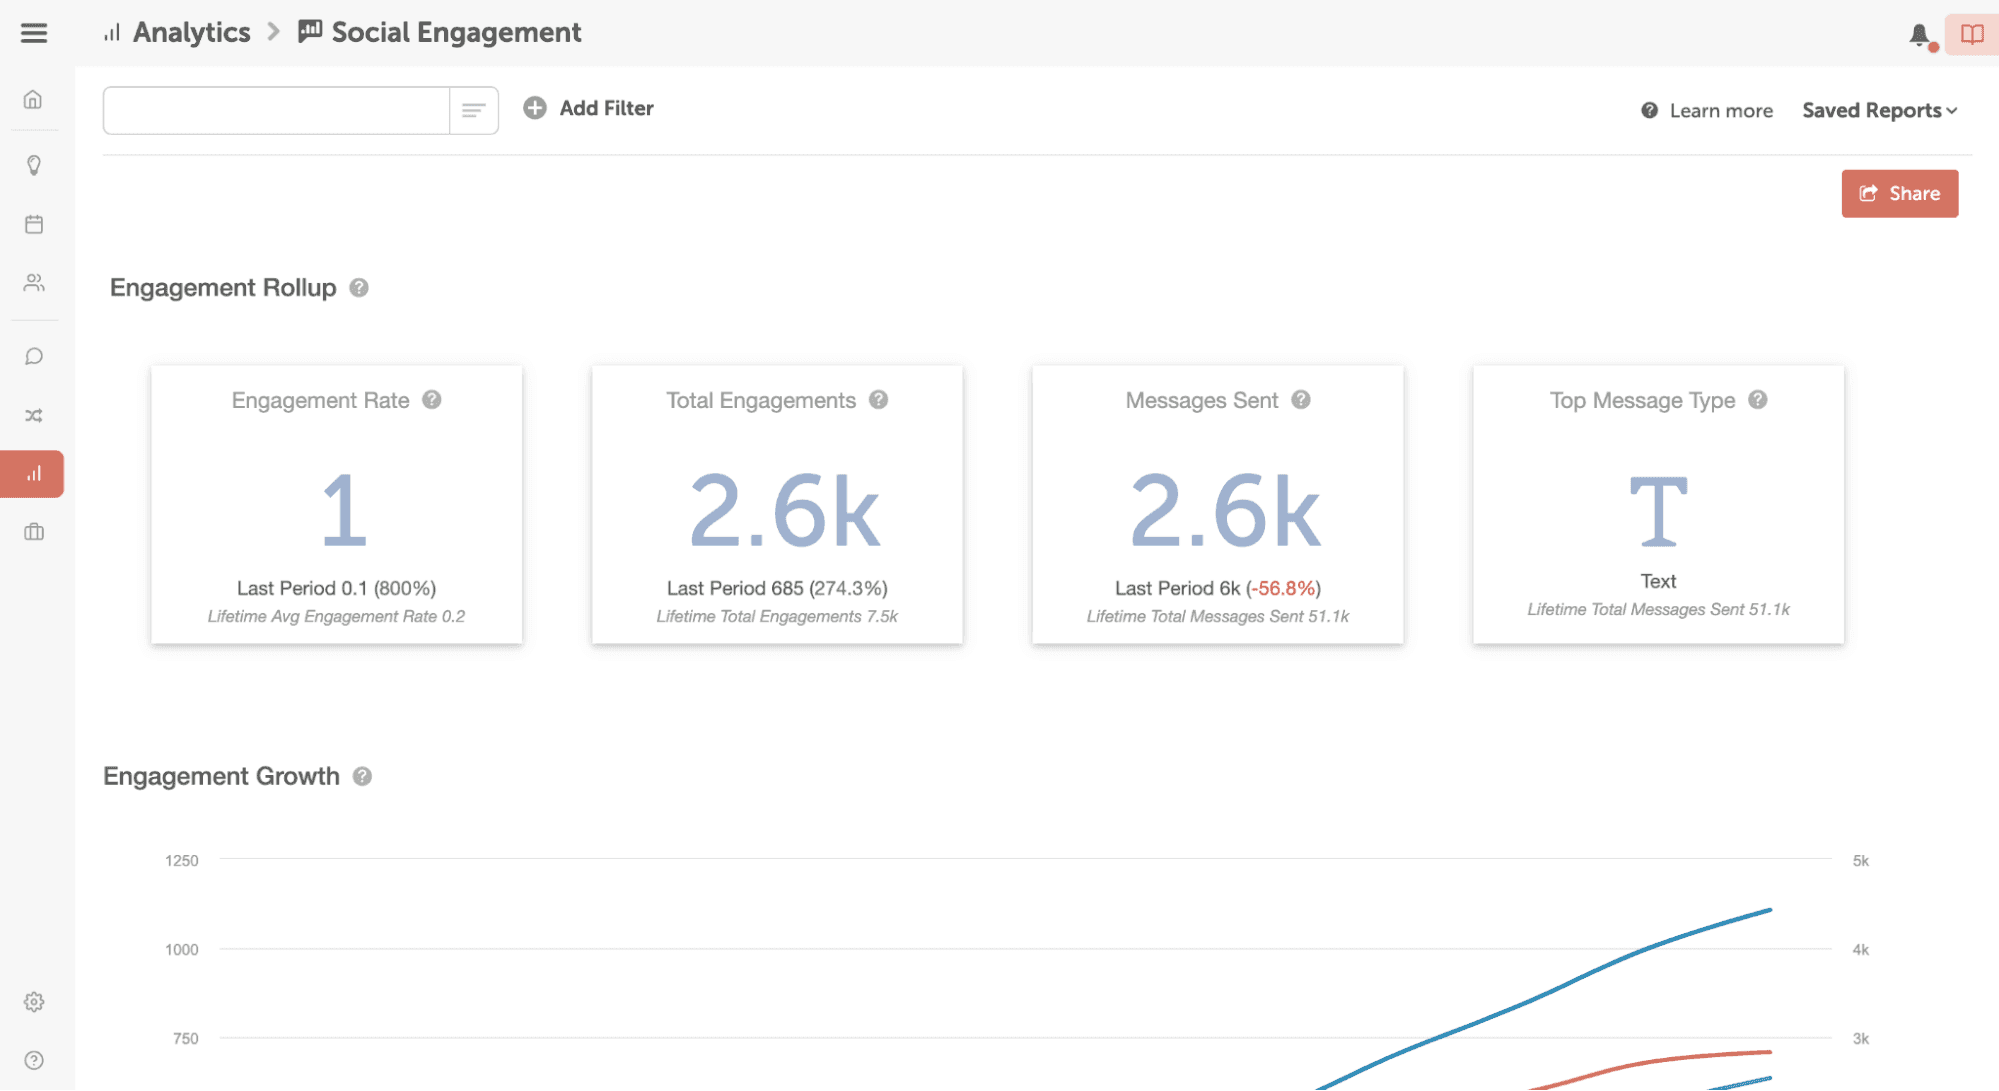 How to view social engagement reports.